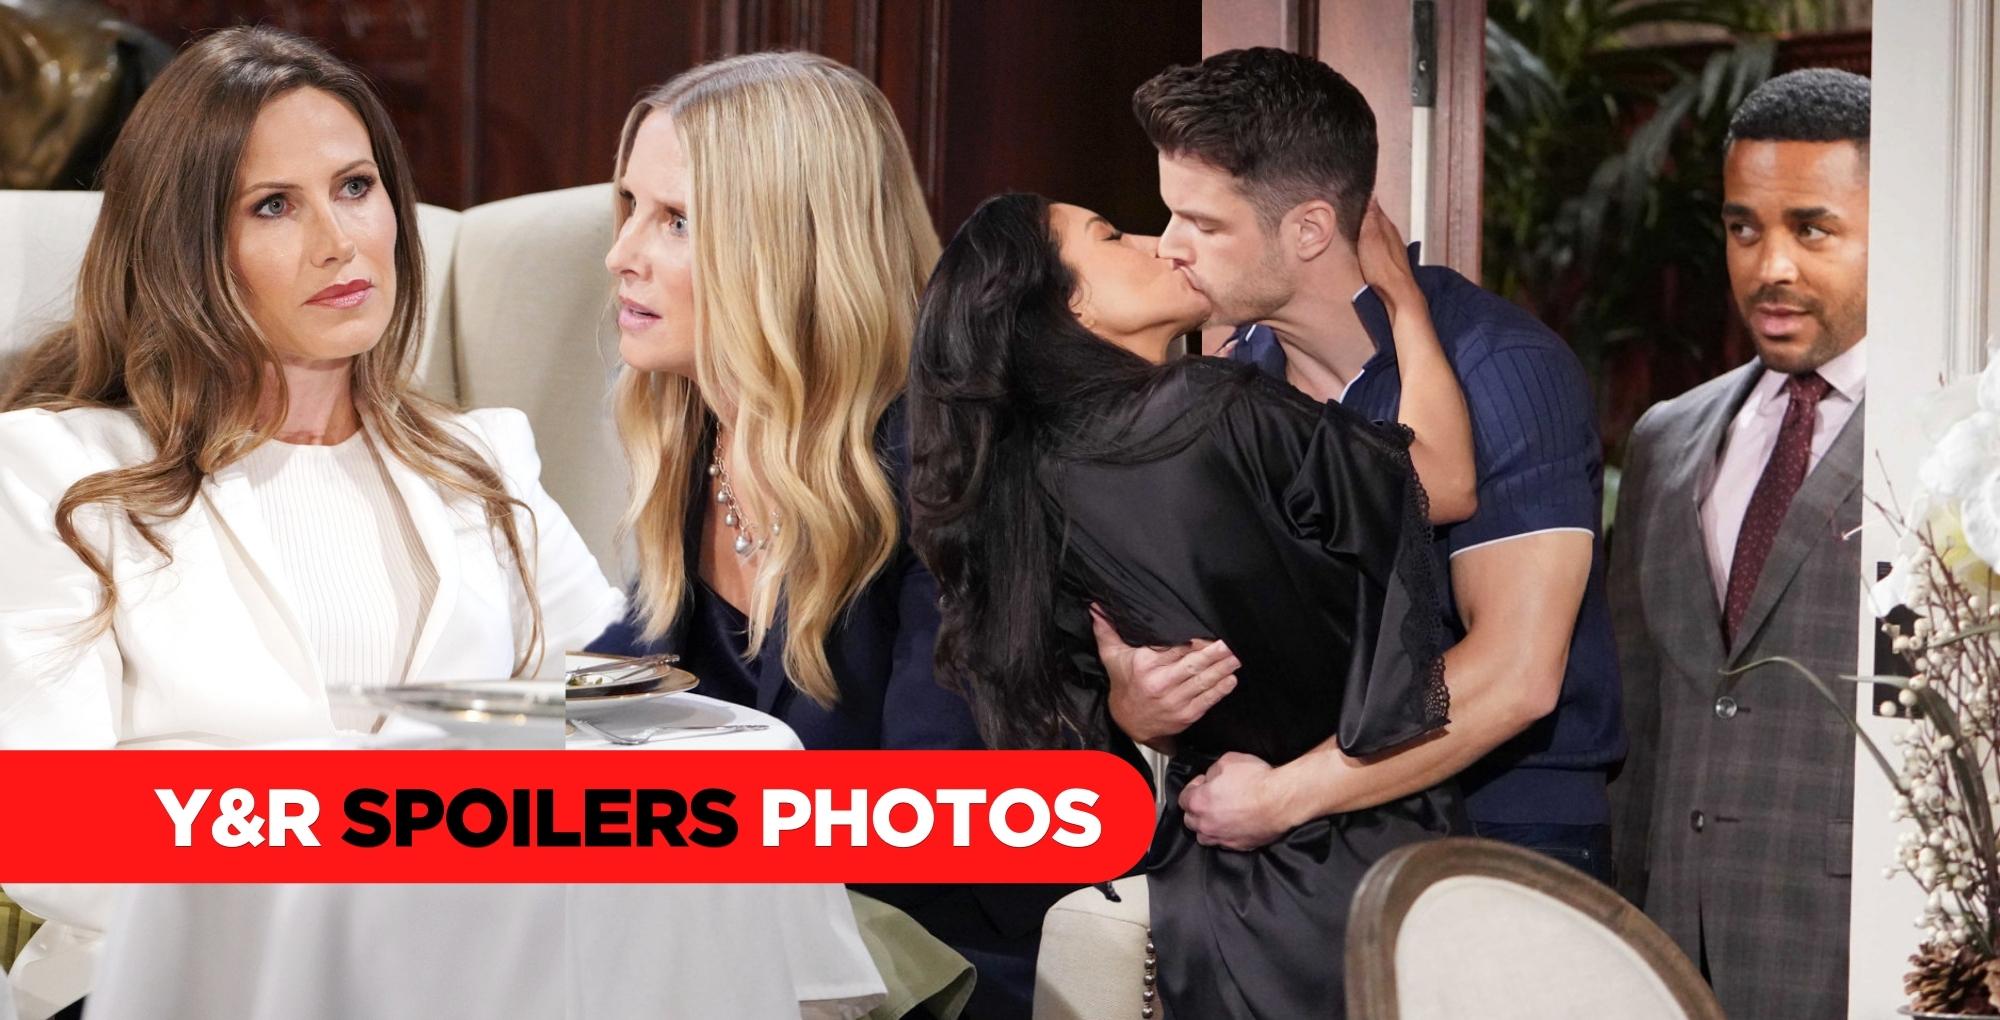 y&r spoilers photo collage.